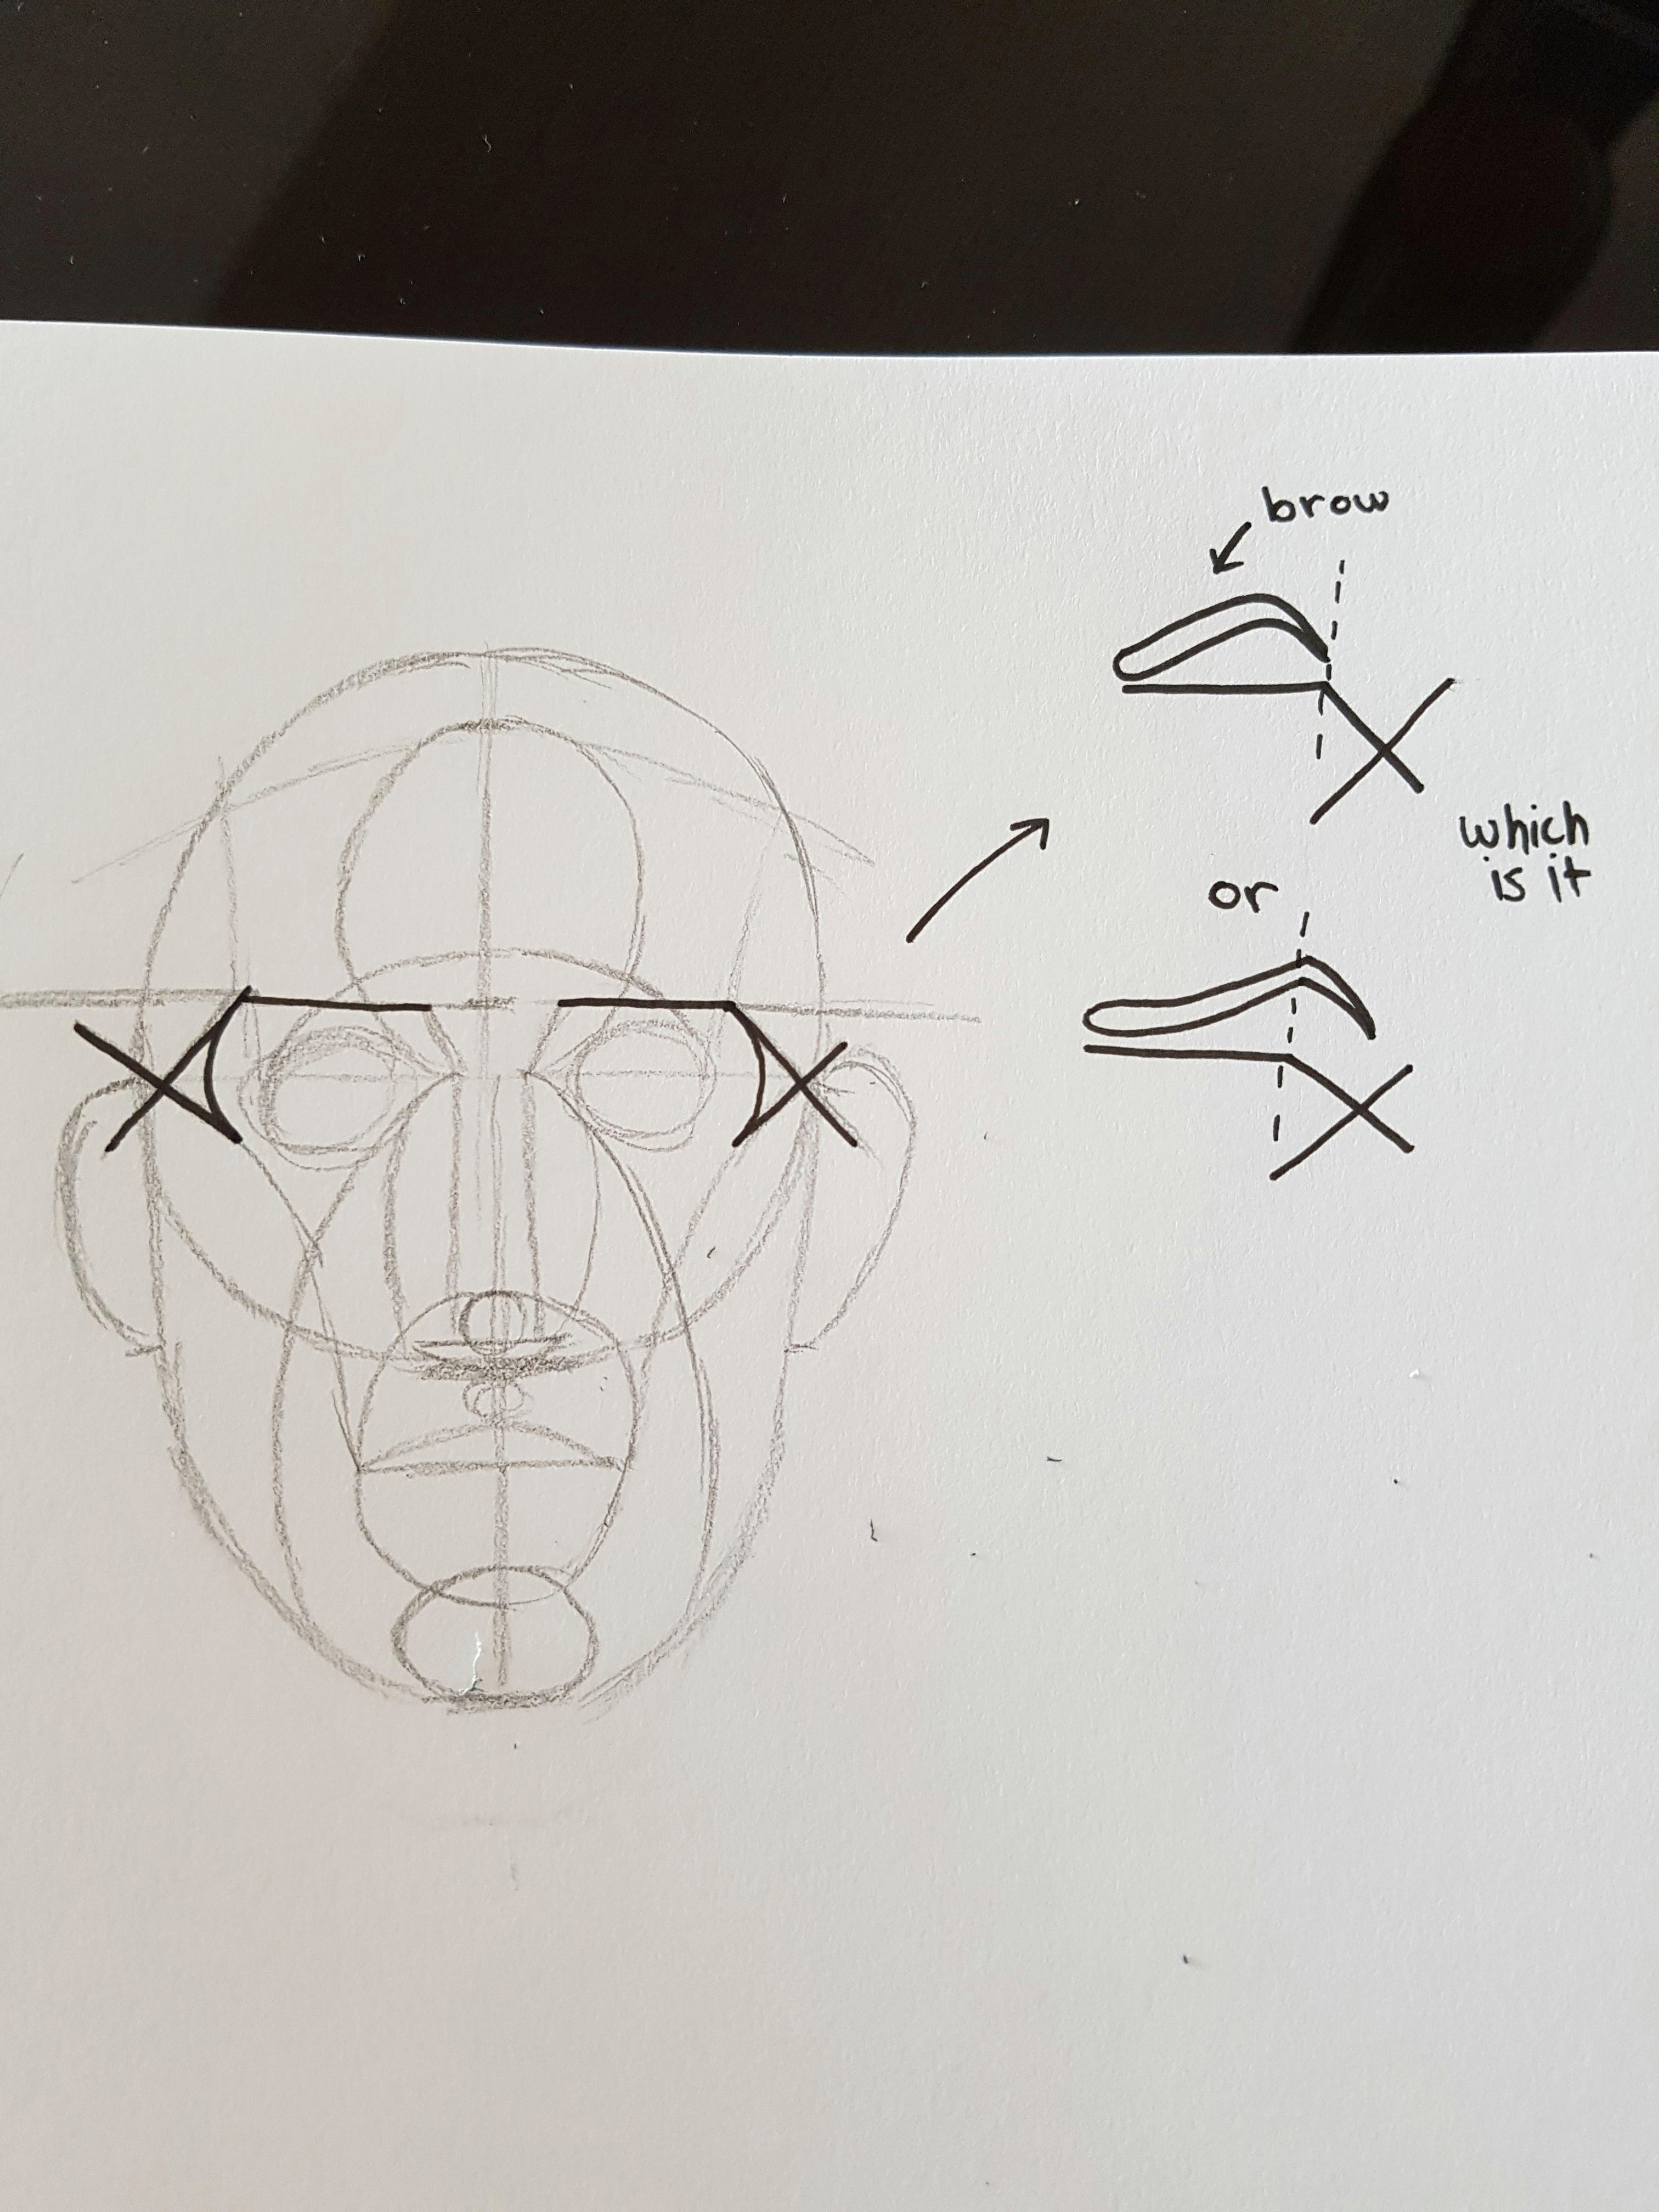 Drawing Skull Reddit Having Difficulty Understanding where the Brow Should Be Placed